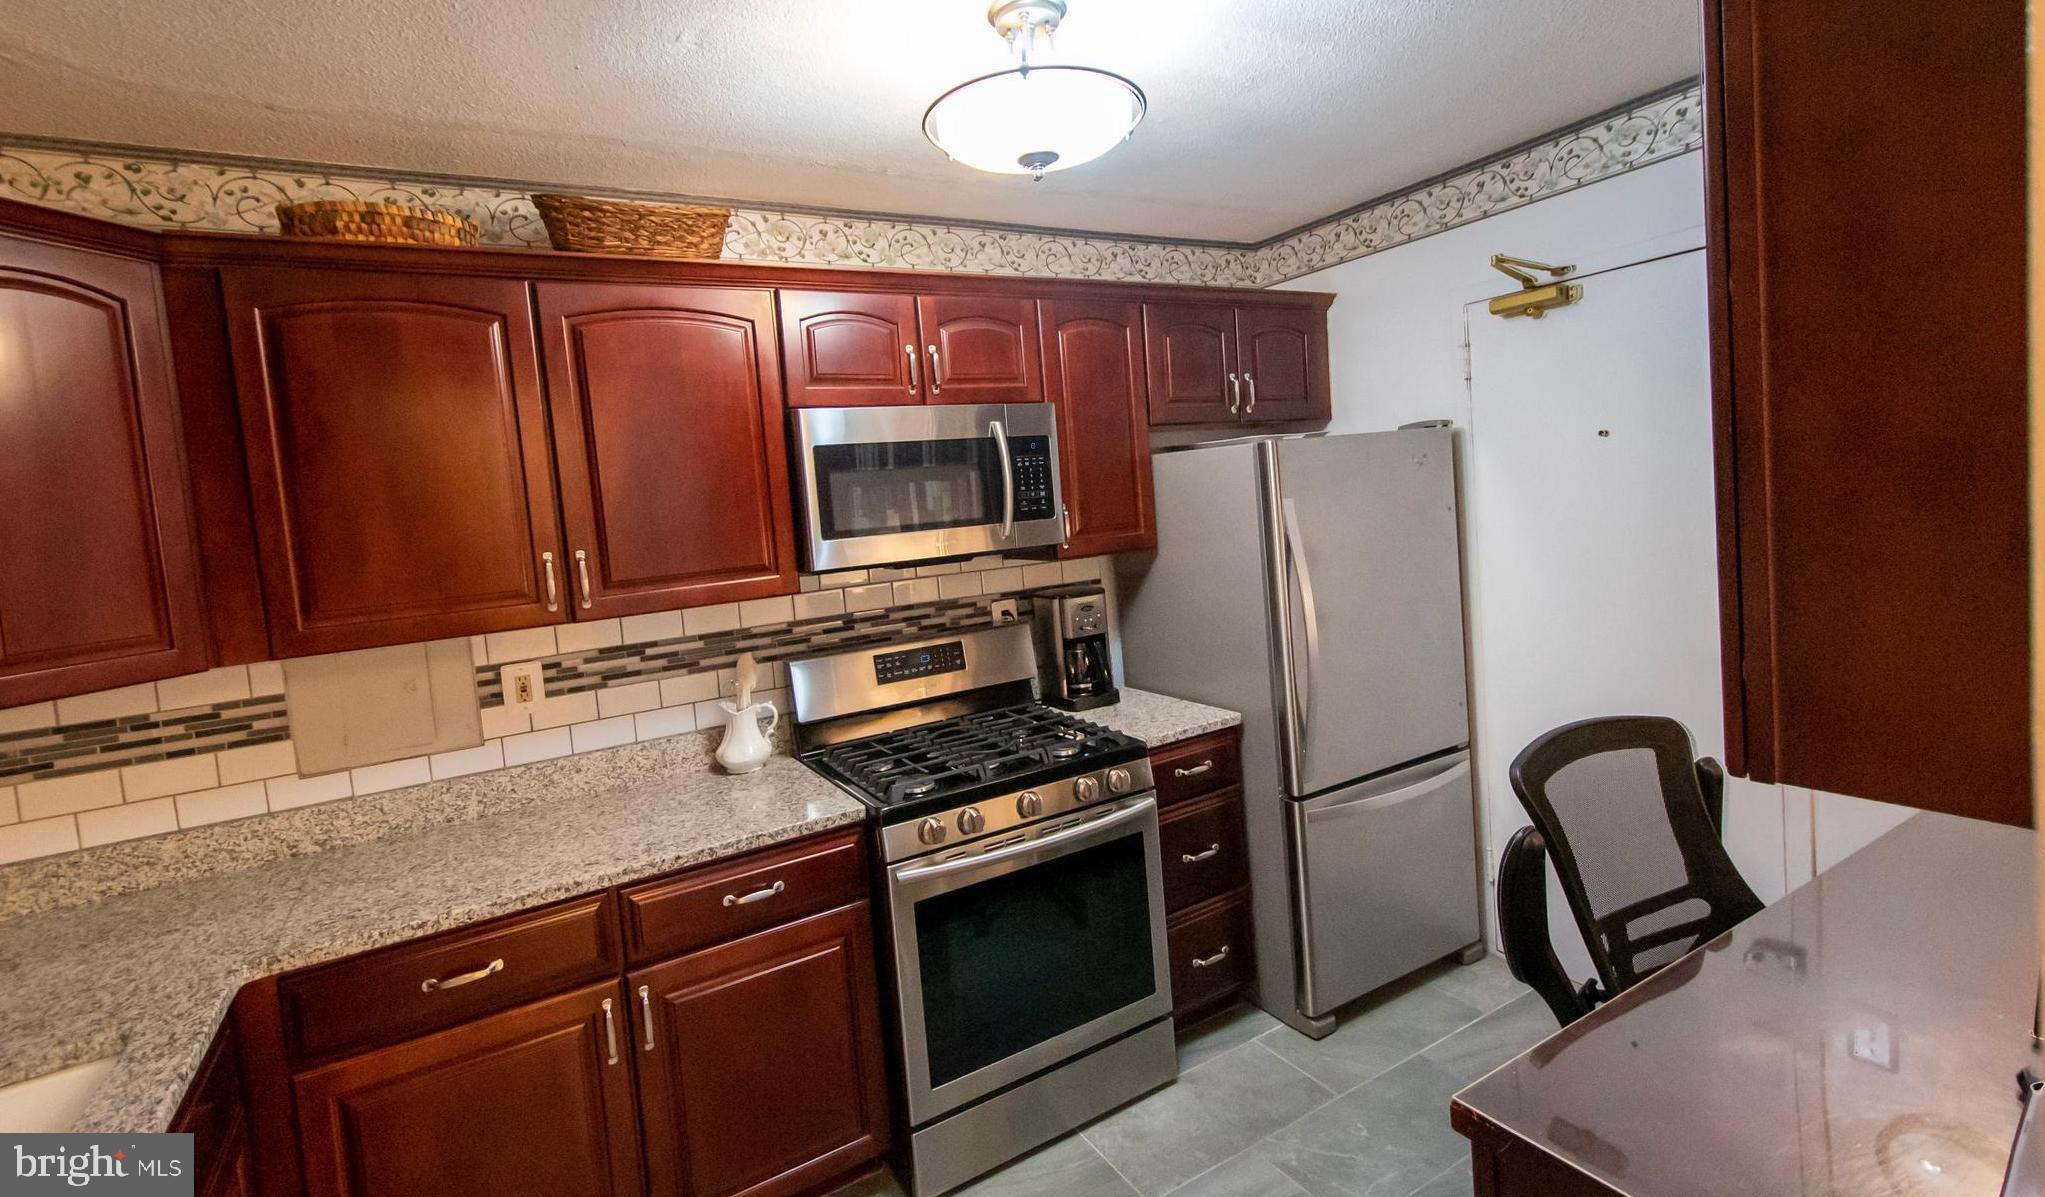 a kitchen with stainless steel appliances granite countertop a stove refrigerator and microwave